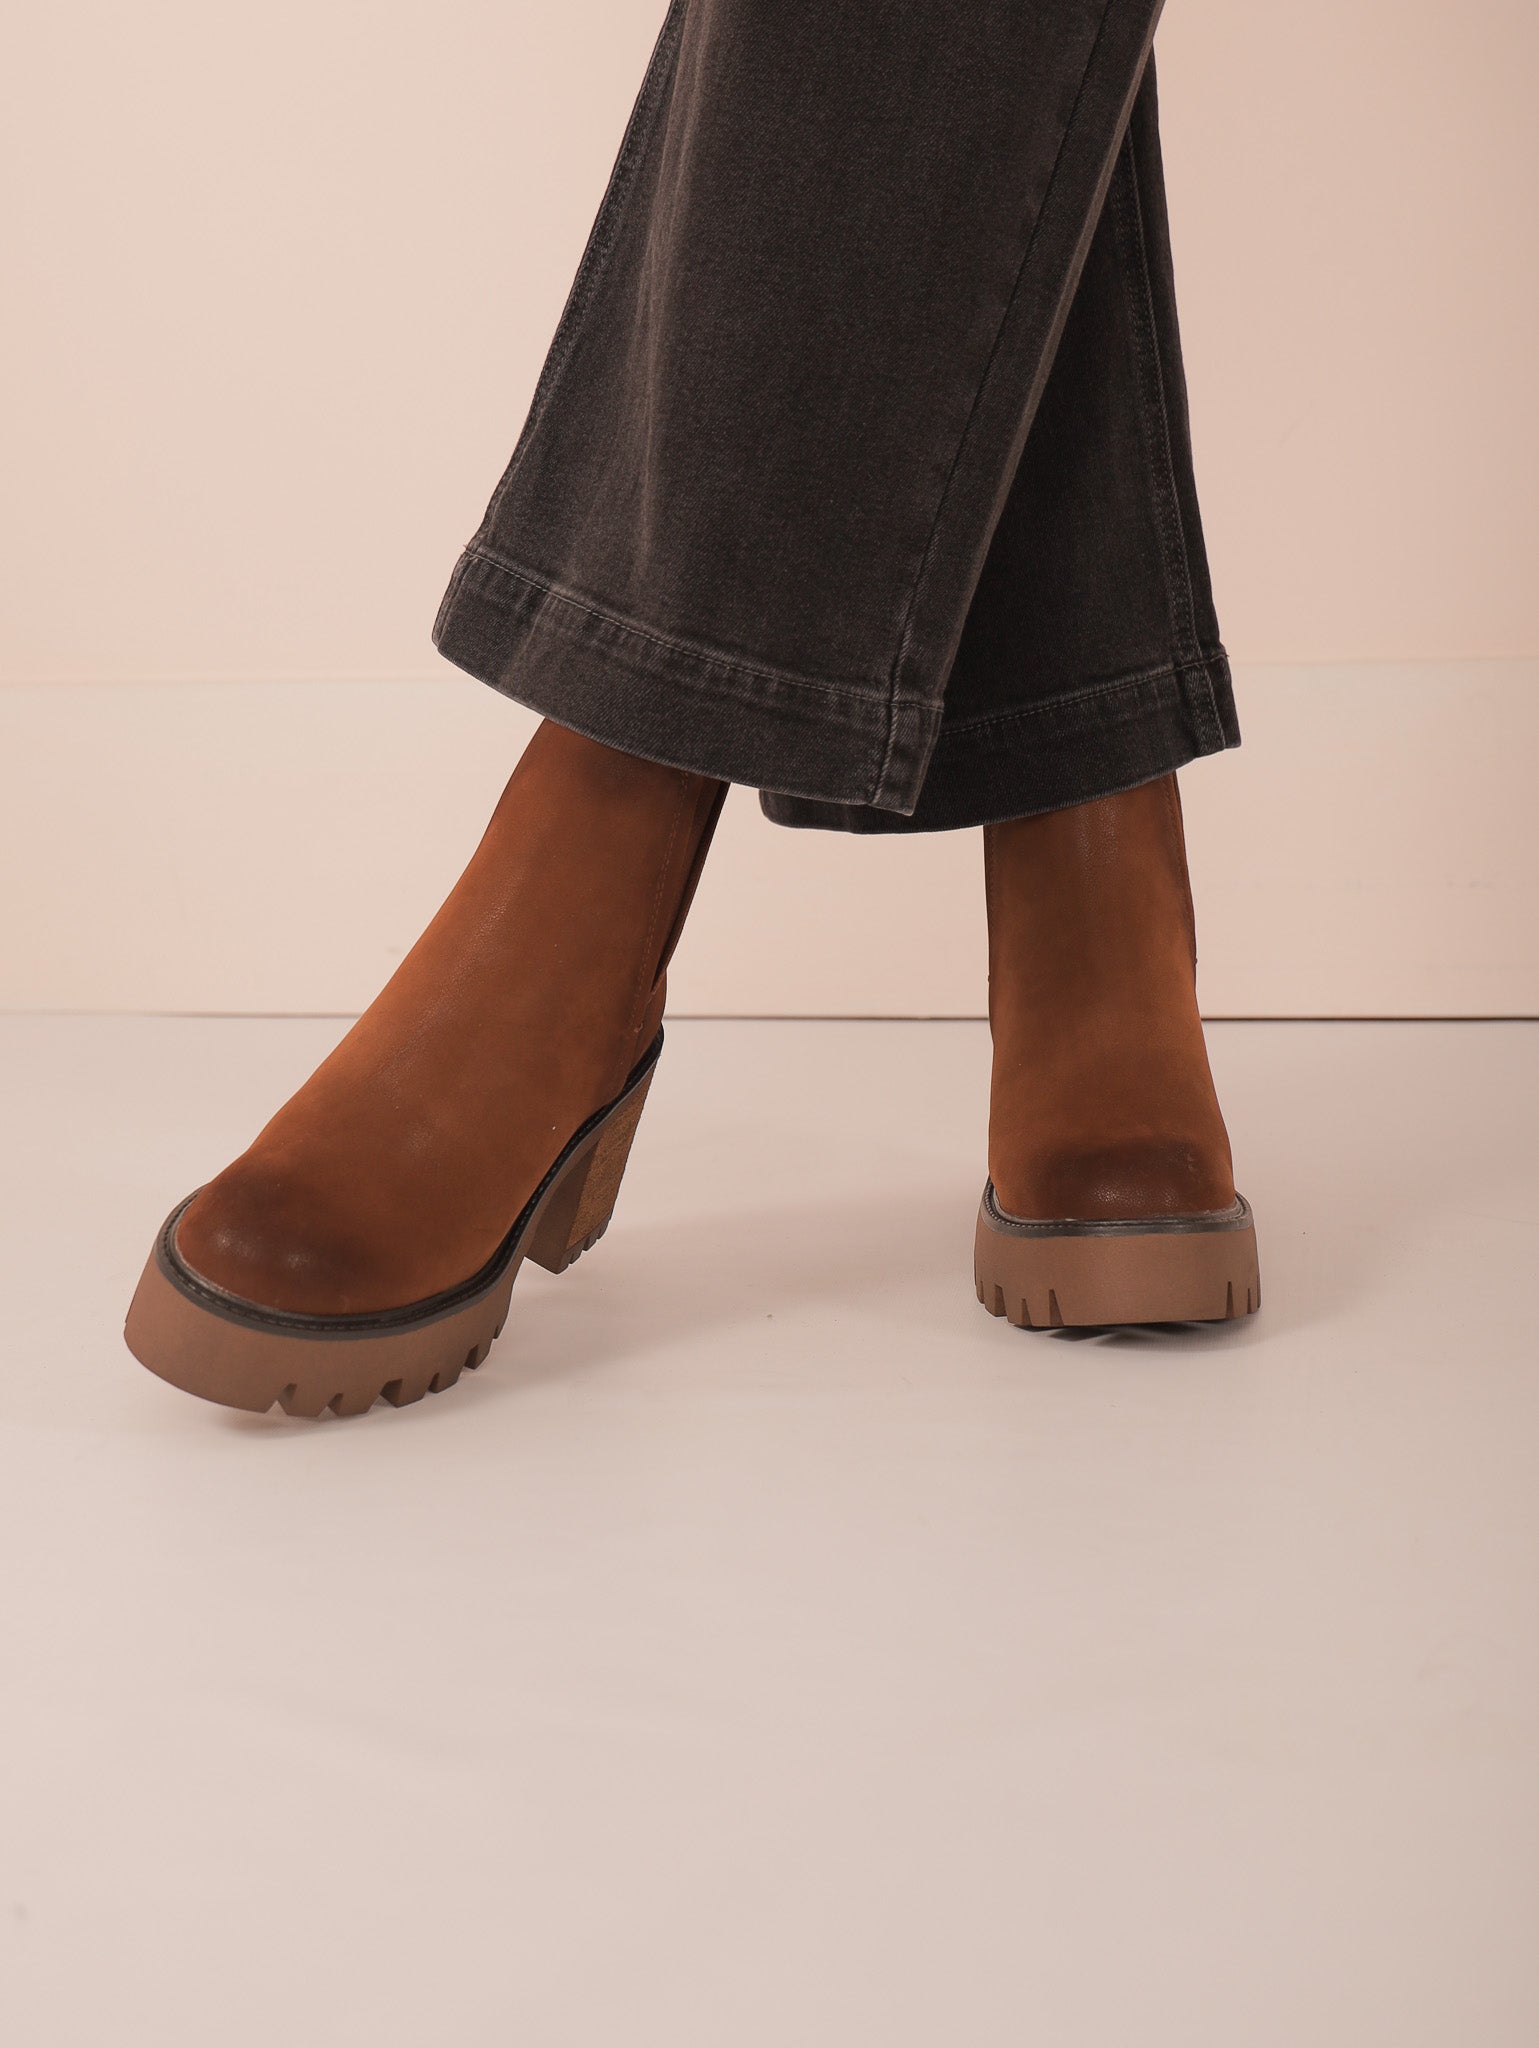 Molly Green - Luxe Chelsea Boots - Shoes